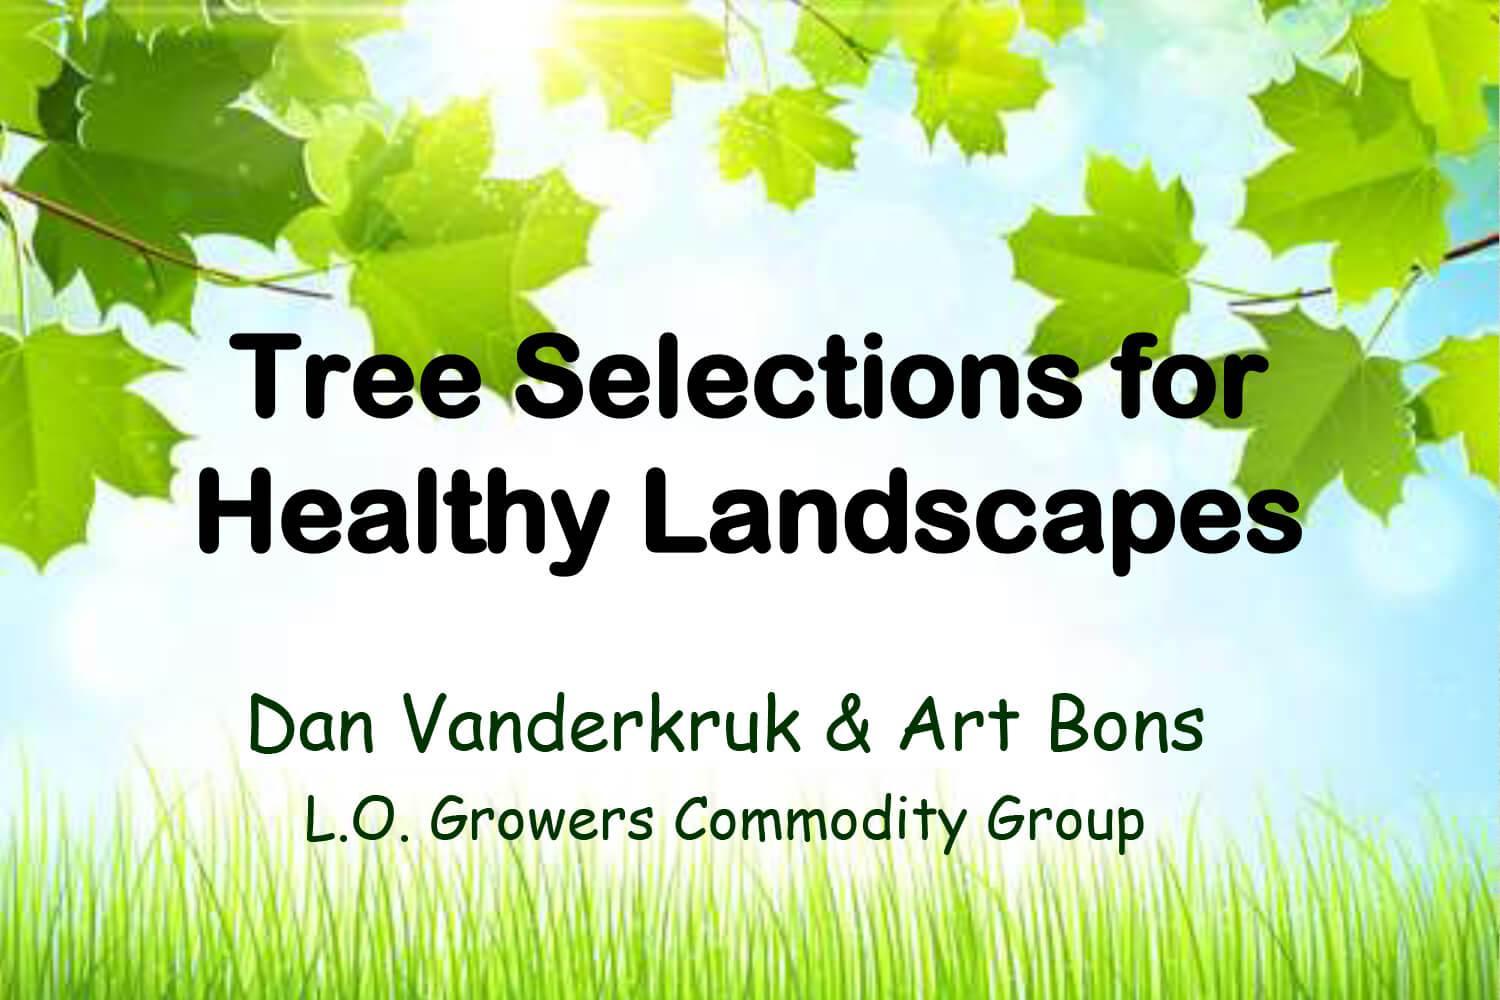 Tree Selections for Healthy Landscapes